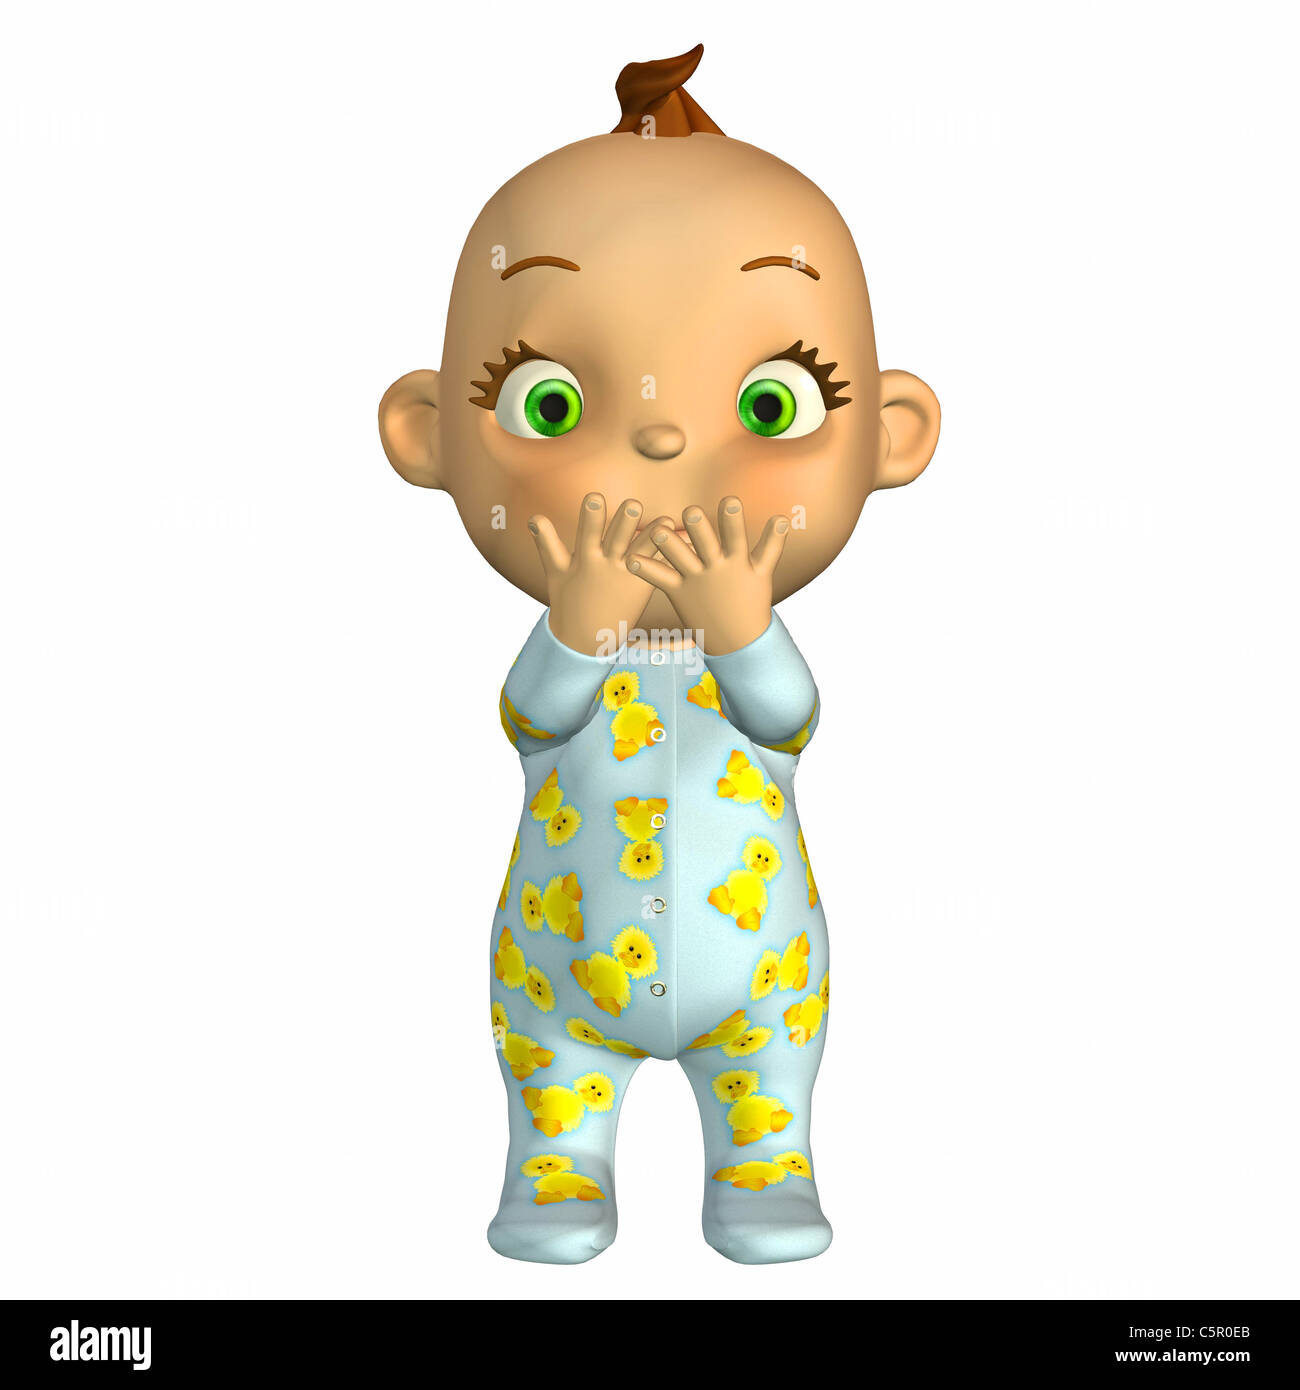 Illustration of a naughty baby cartoon isolated on a white background Stock Photo